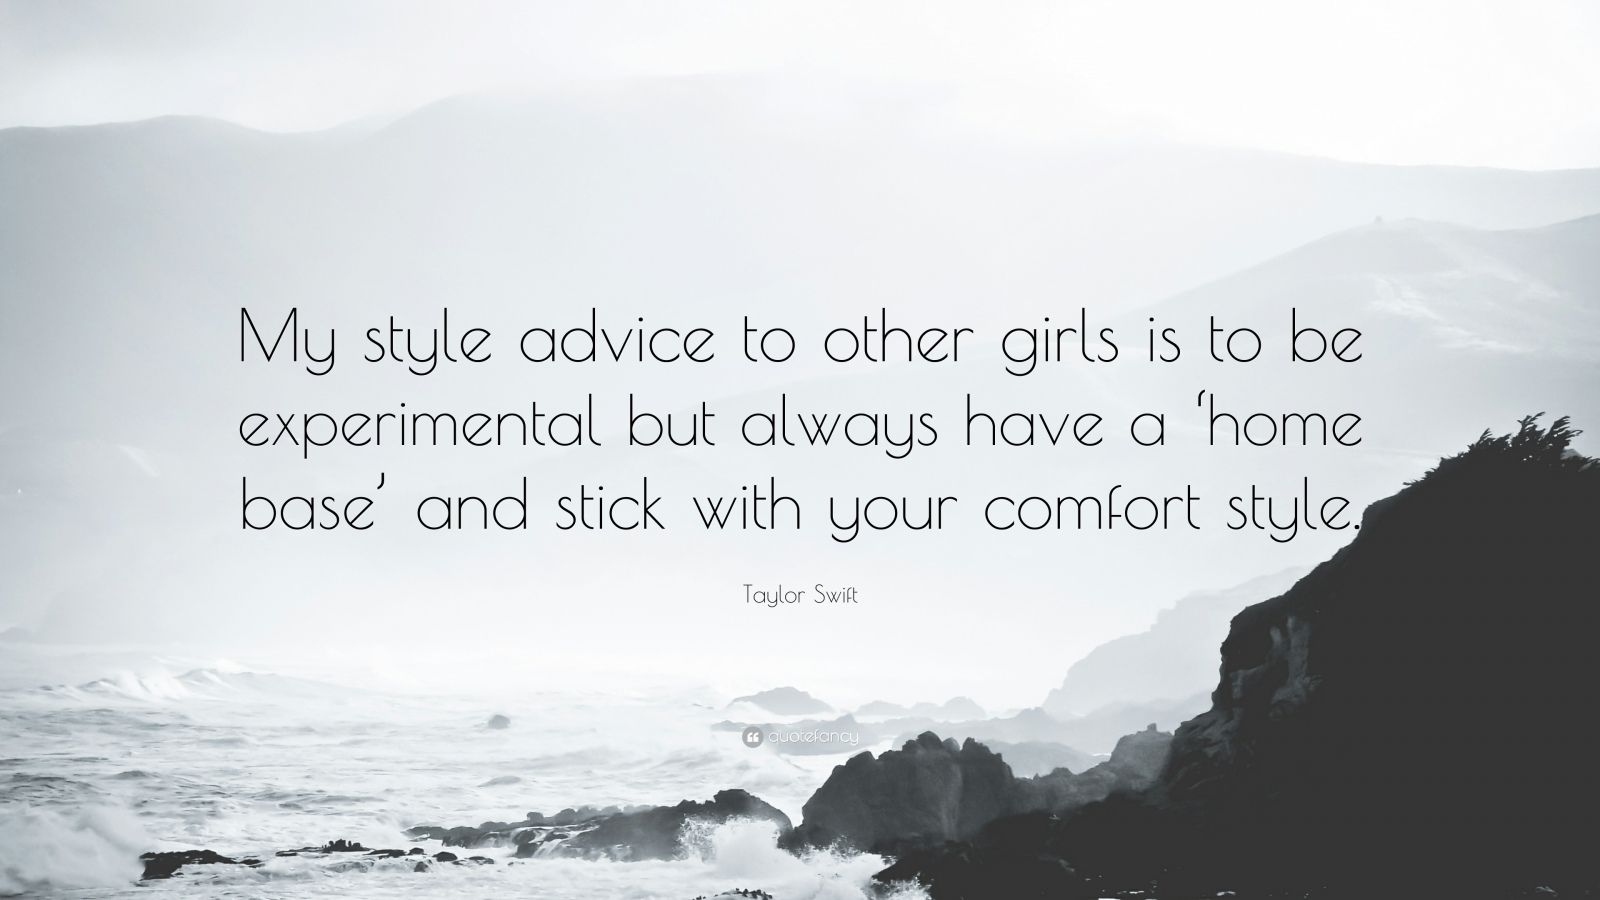 Taylor Swift Quote: “My style advice to other girls is to be